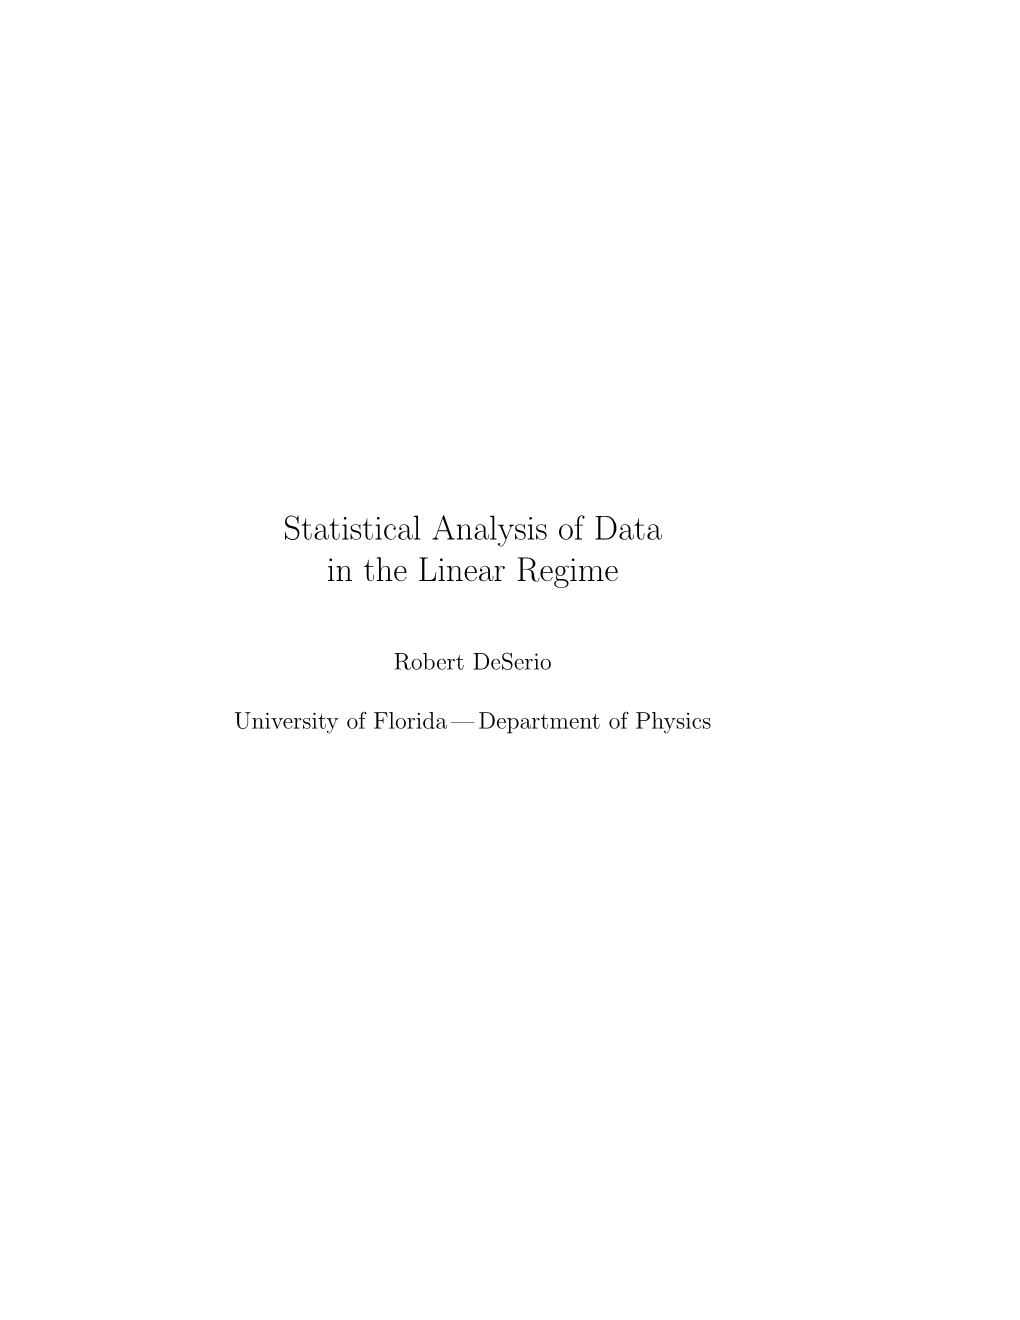 Statistical Analysis of Data in the Linear Regime